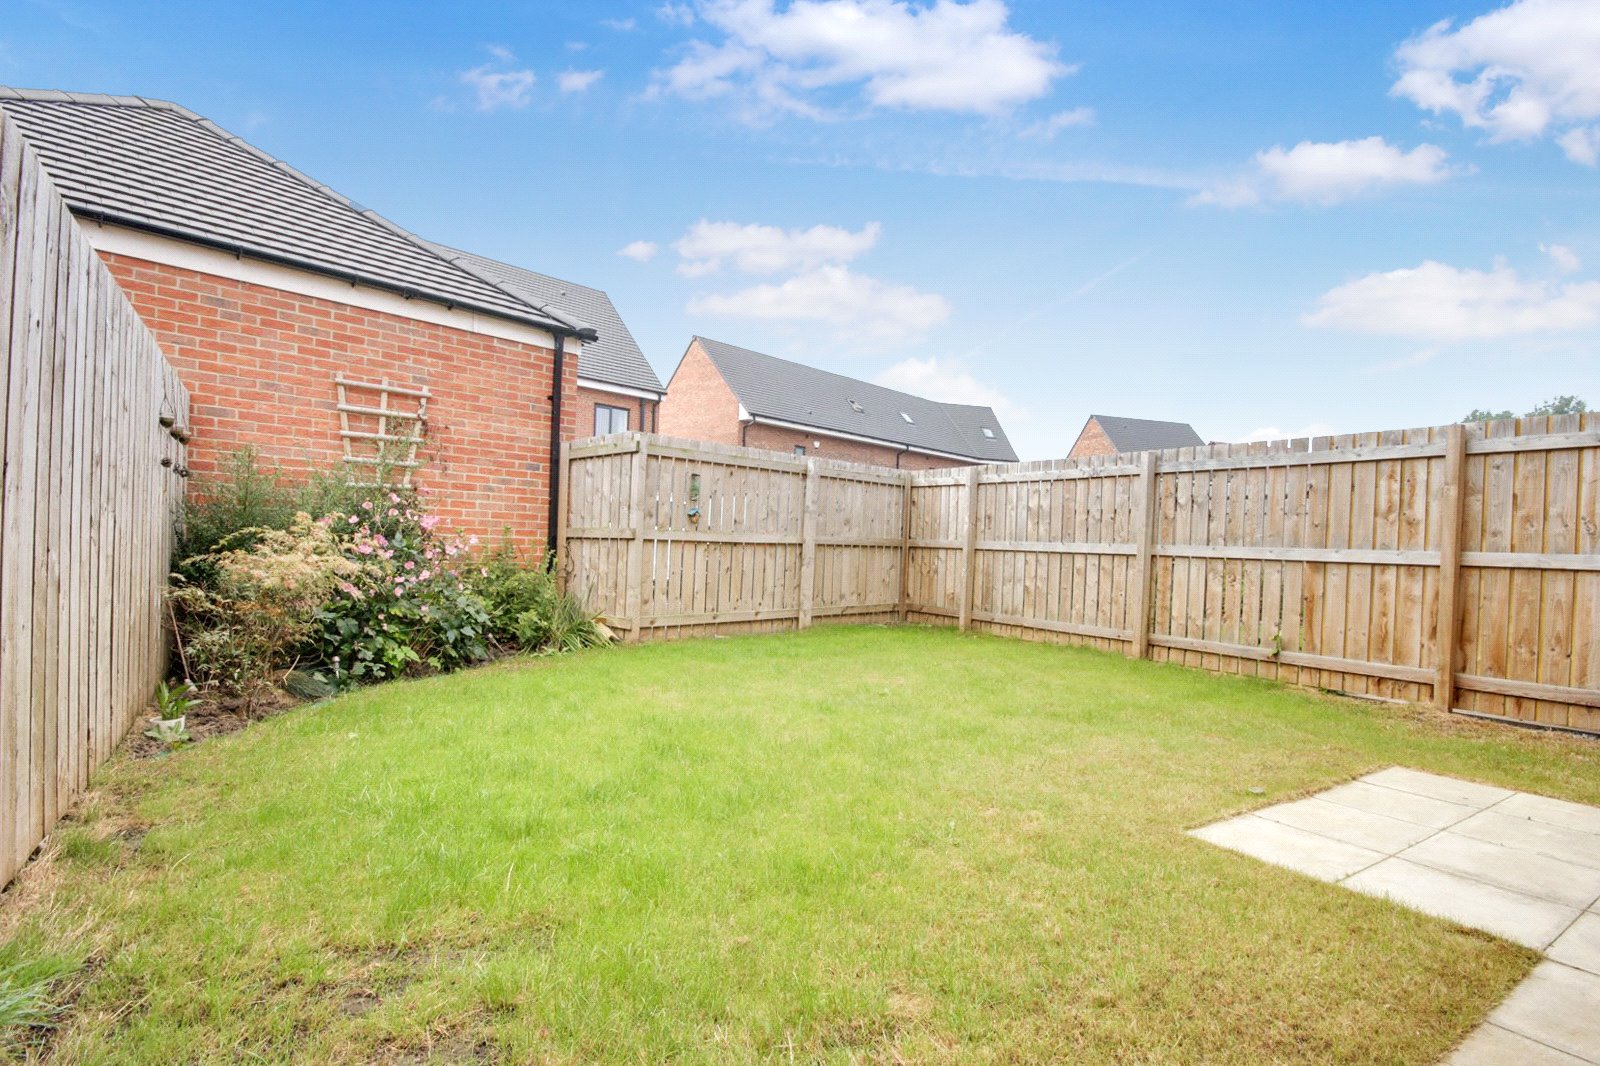 3 bed house for sale in Dorado Close, Stockton-on-Tees  - Property Image 9